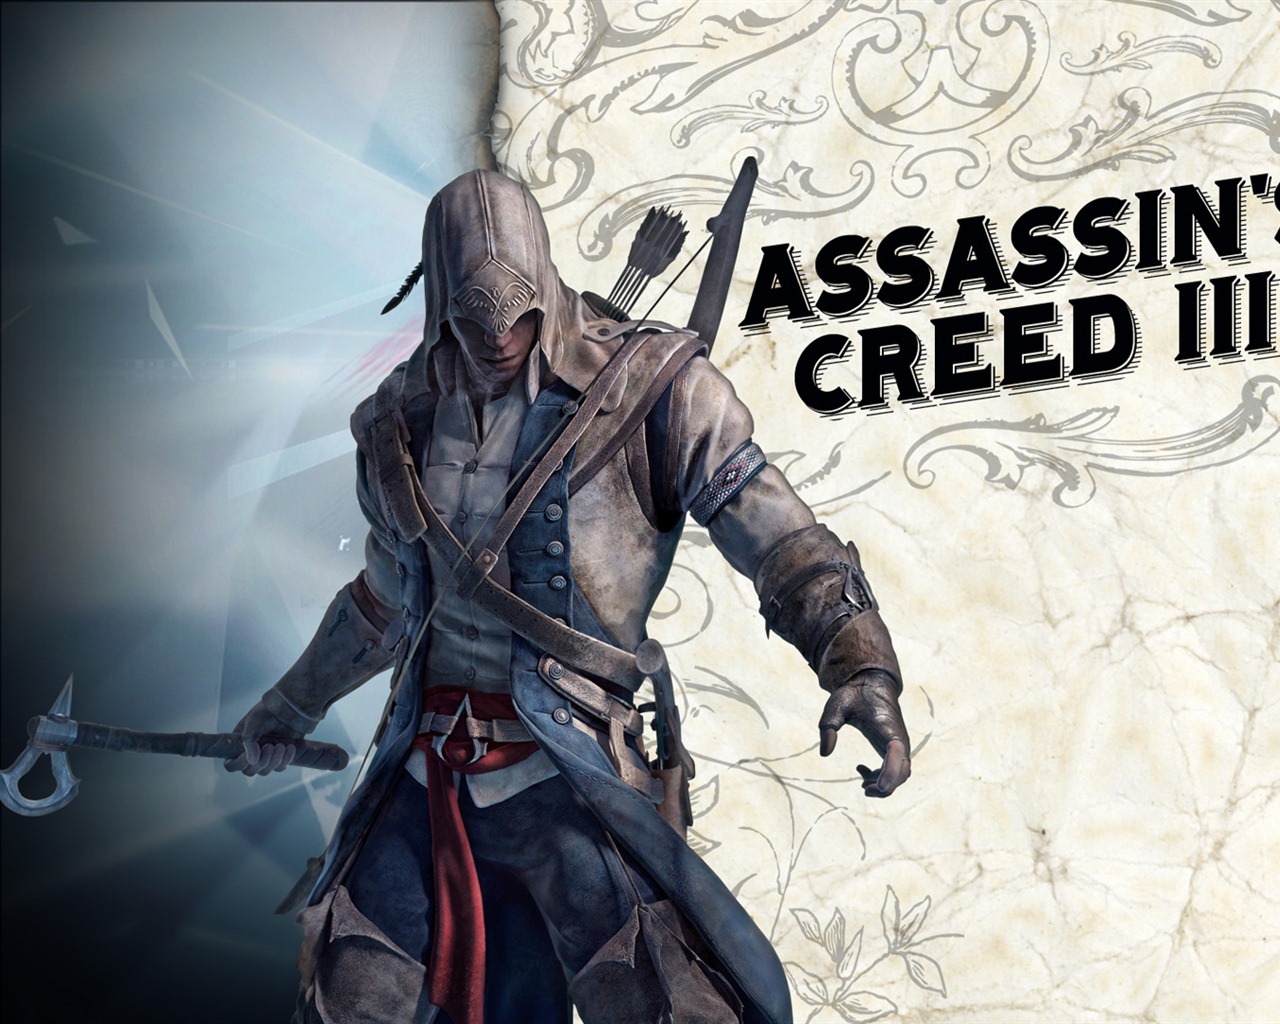 Assassin's Creed 3 HD wallpapers #7 - 1280x1024